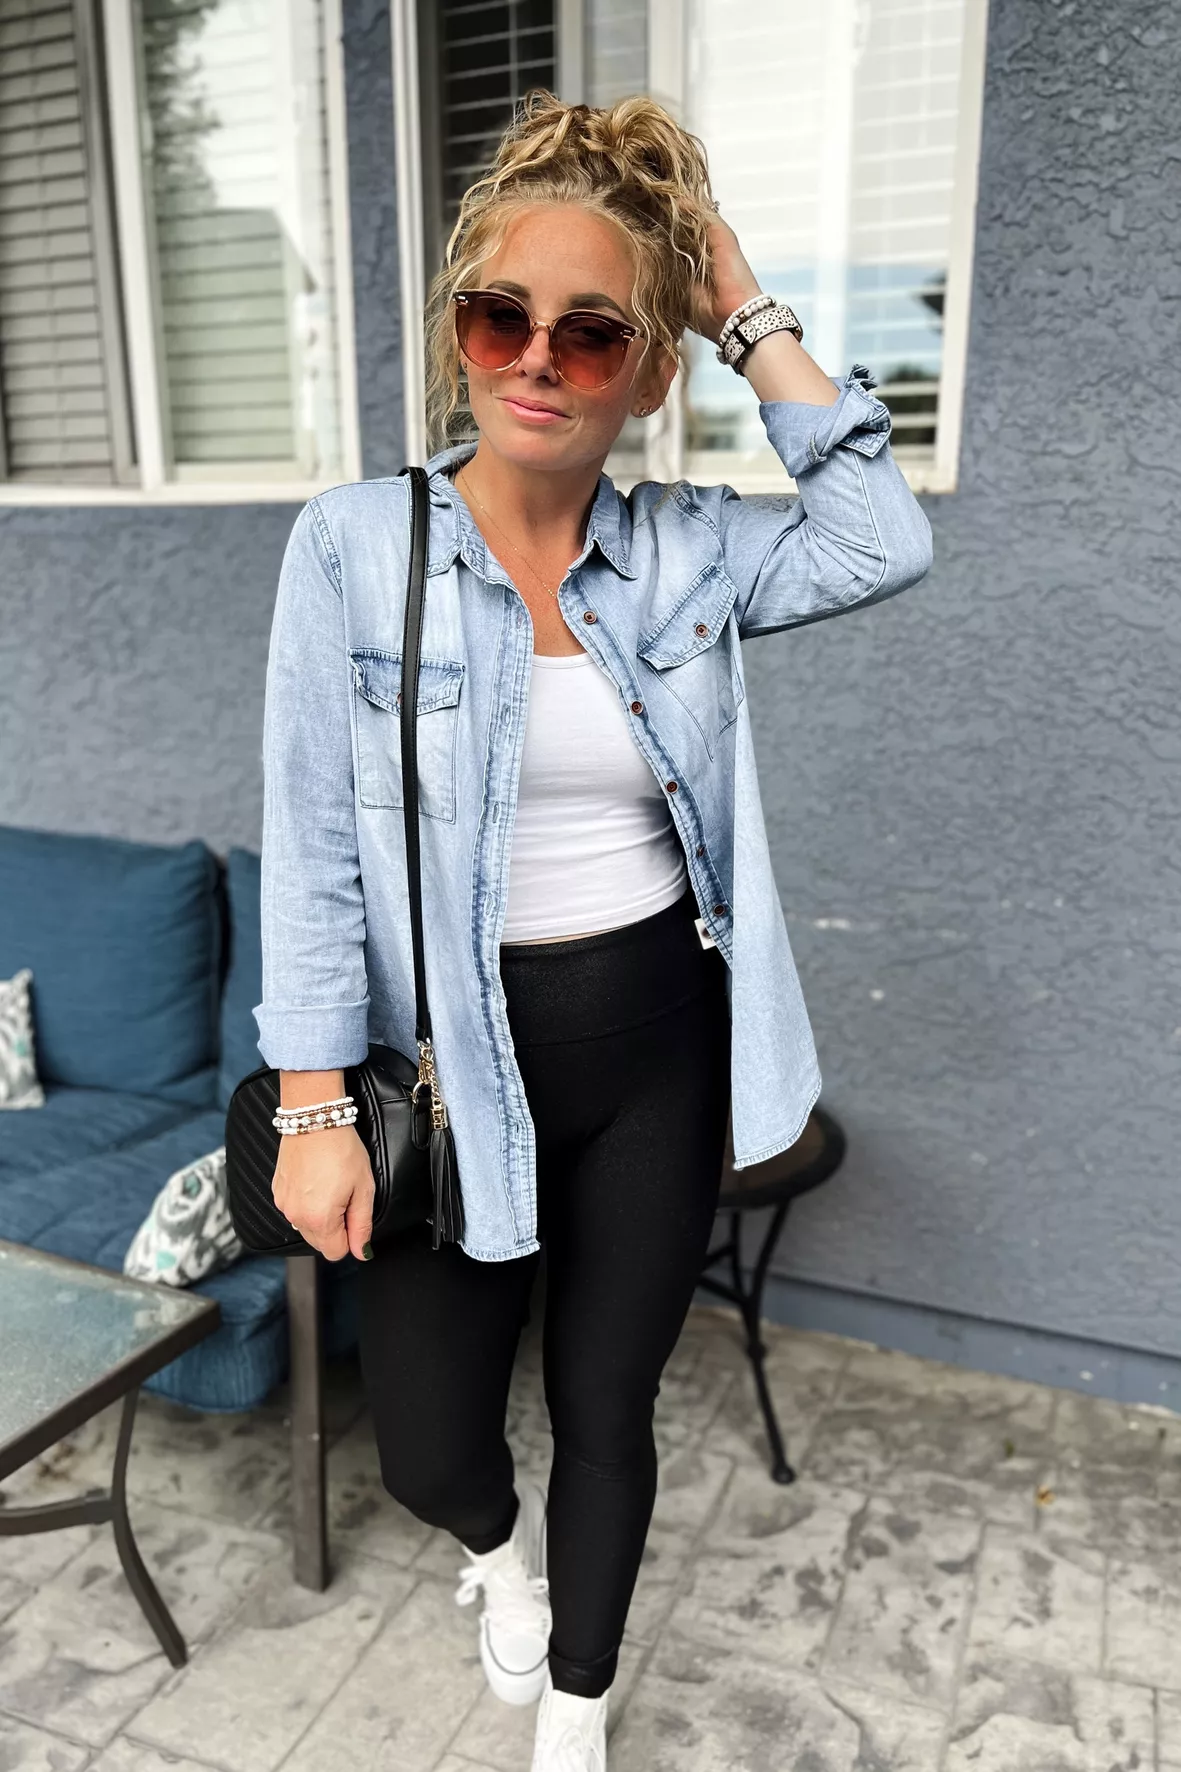 Denim Shirt with Leggings Outfits (26 ideas & outfits)